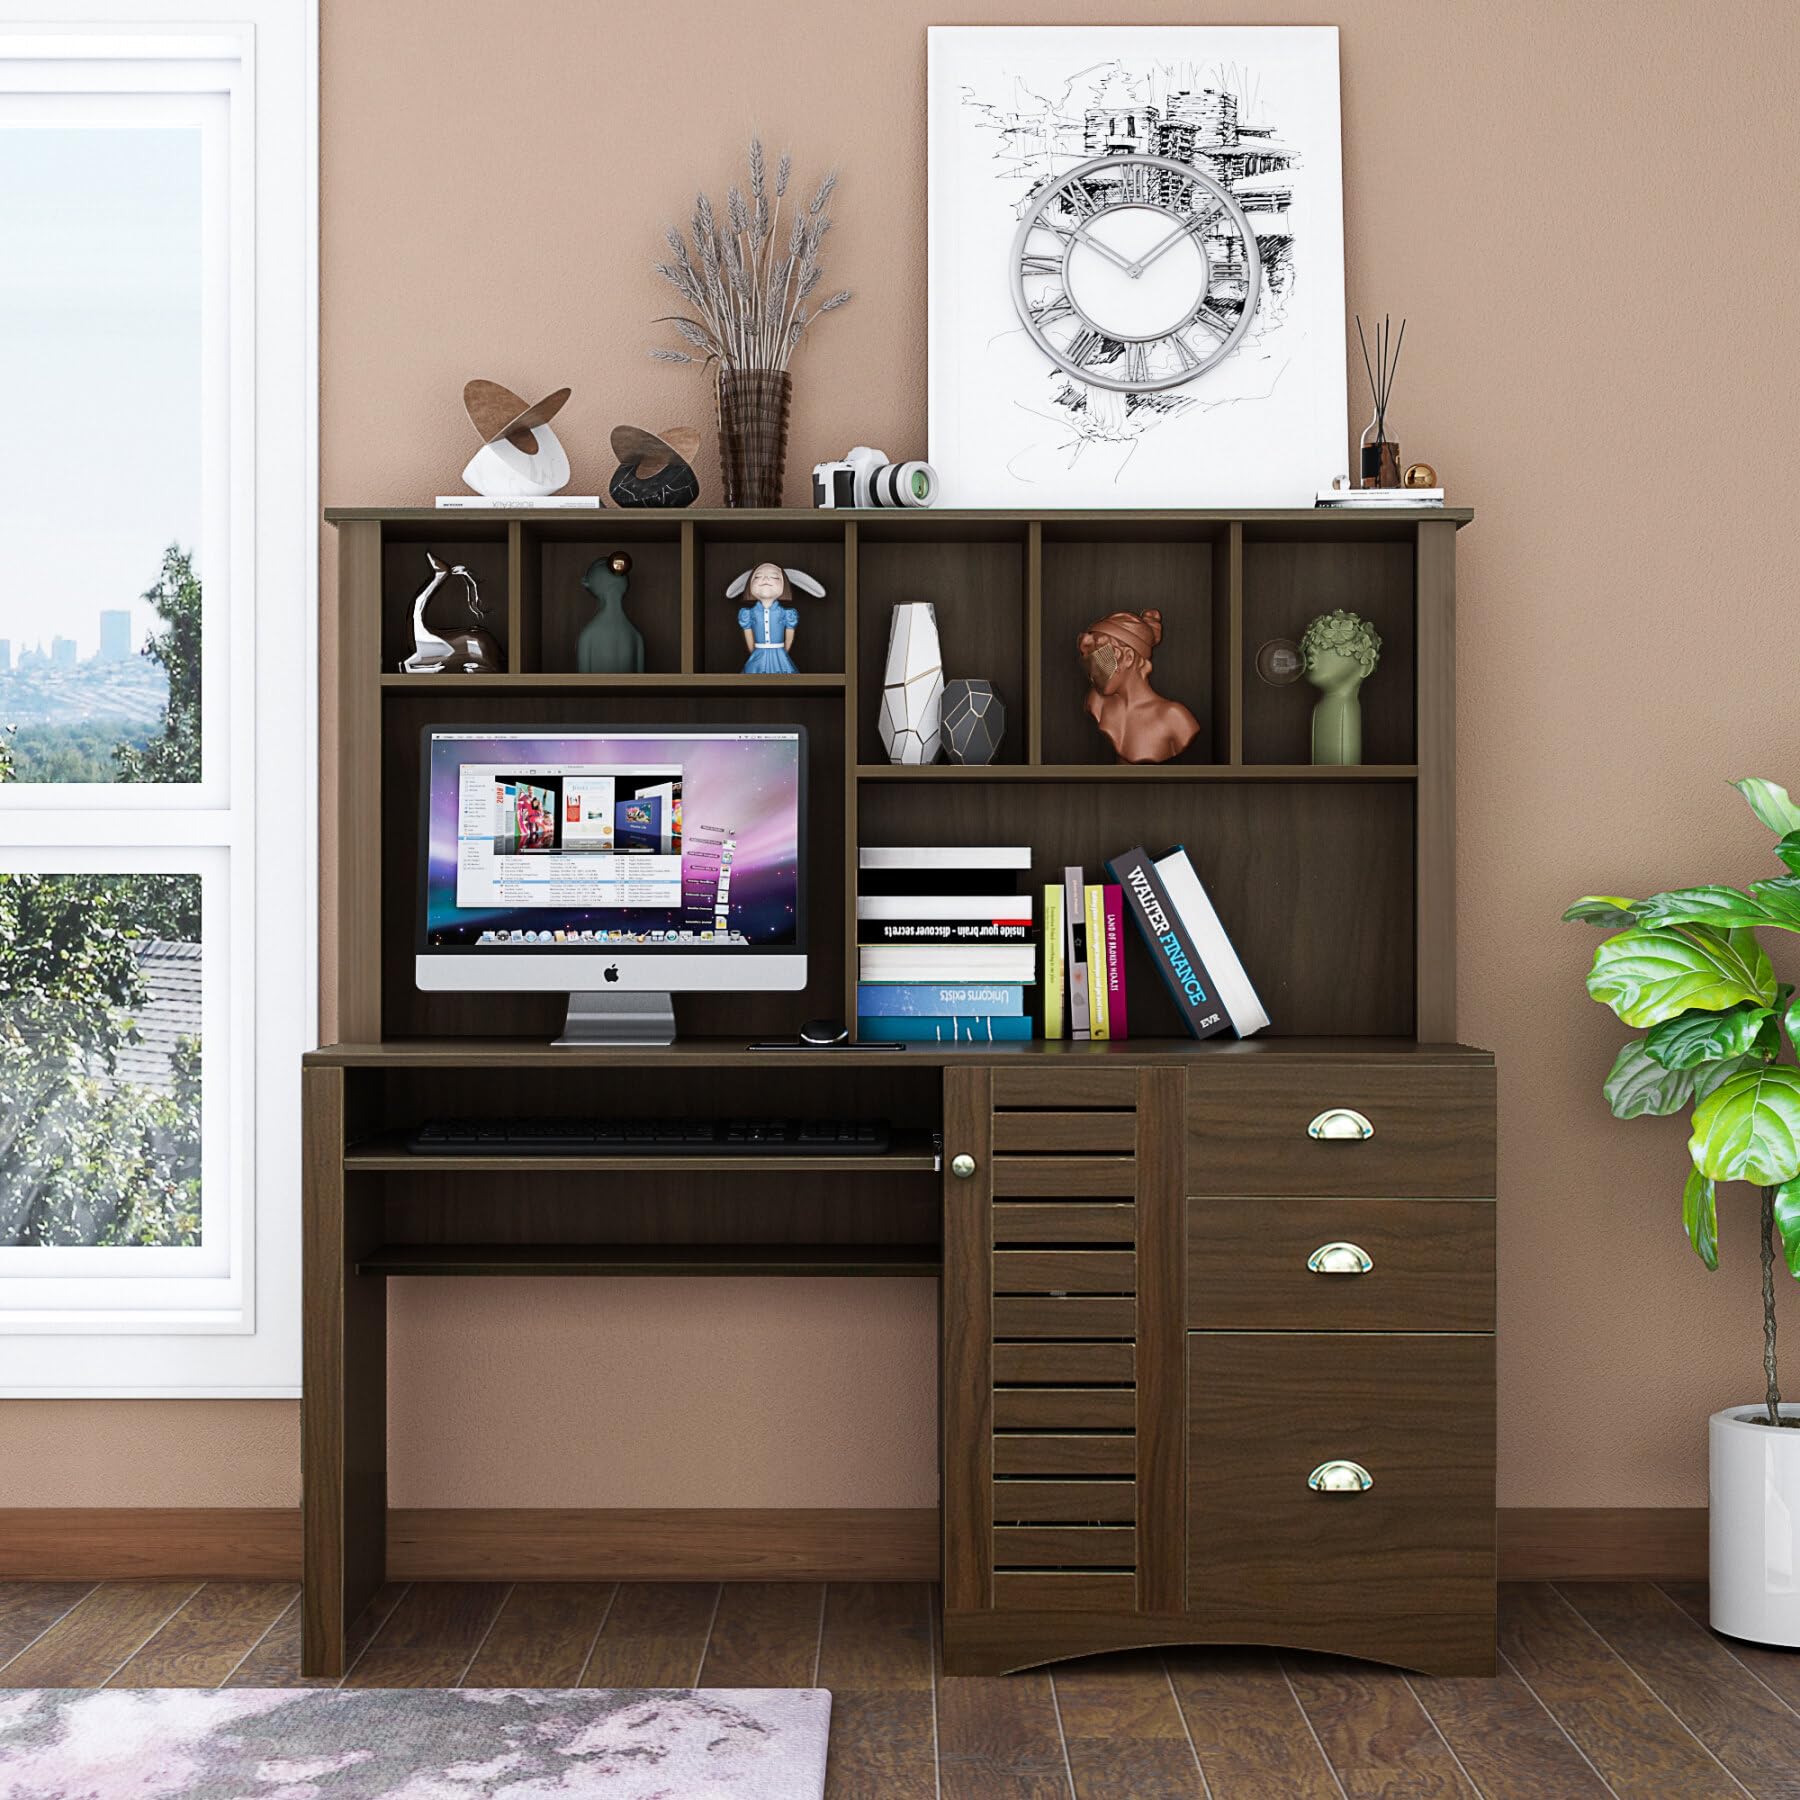 JINS&VICO Computer Desk with Drawers Bookshelf and Keyboard Tray,Wood Executive Desk with Hutch,Teens Student Desk, Modern Style Writing Laptop Home Office Desk,Computer Desk with Walnut Finish